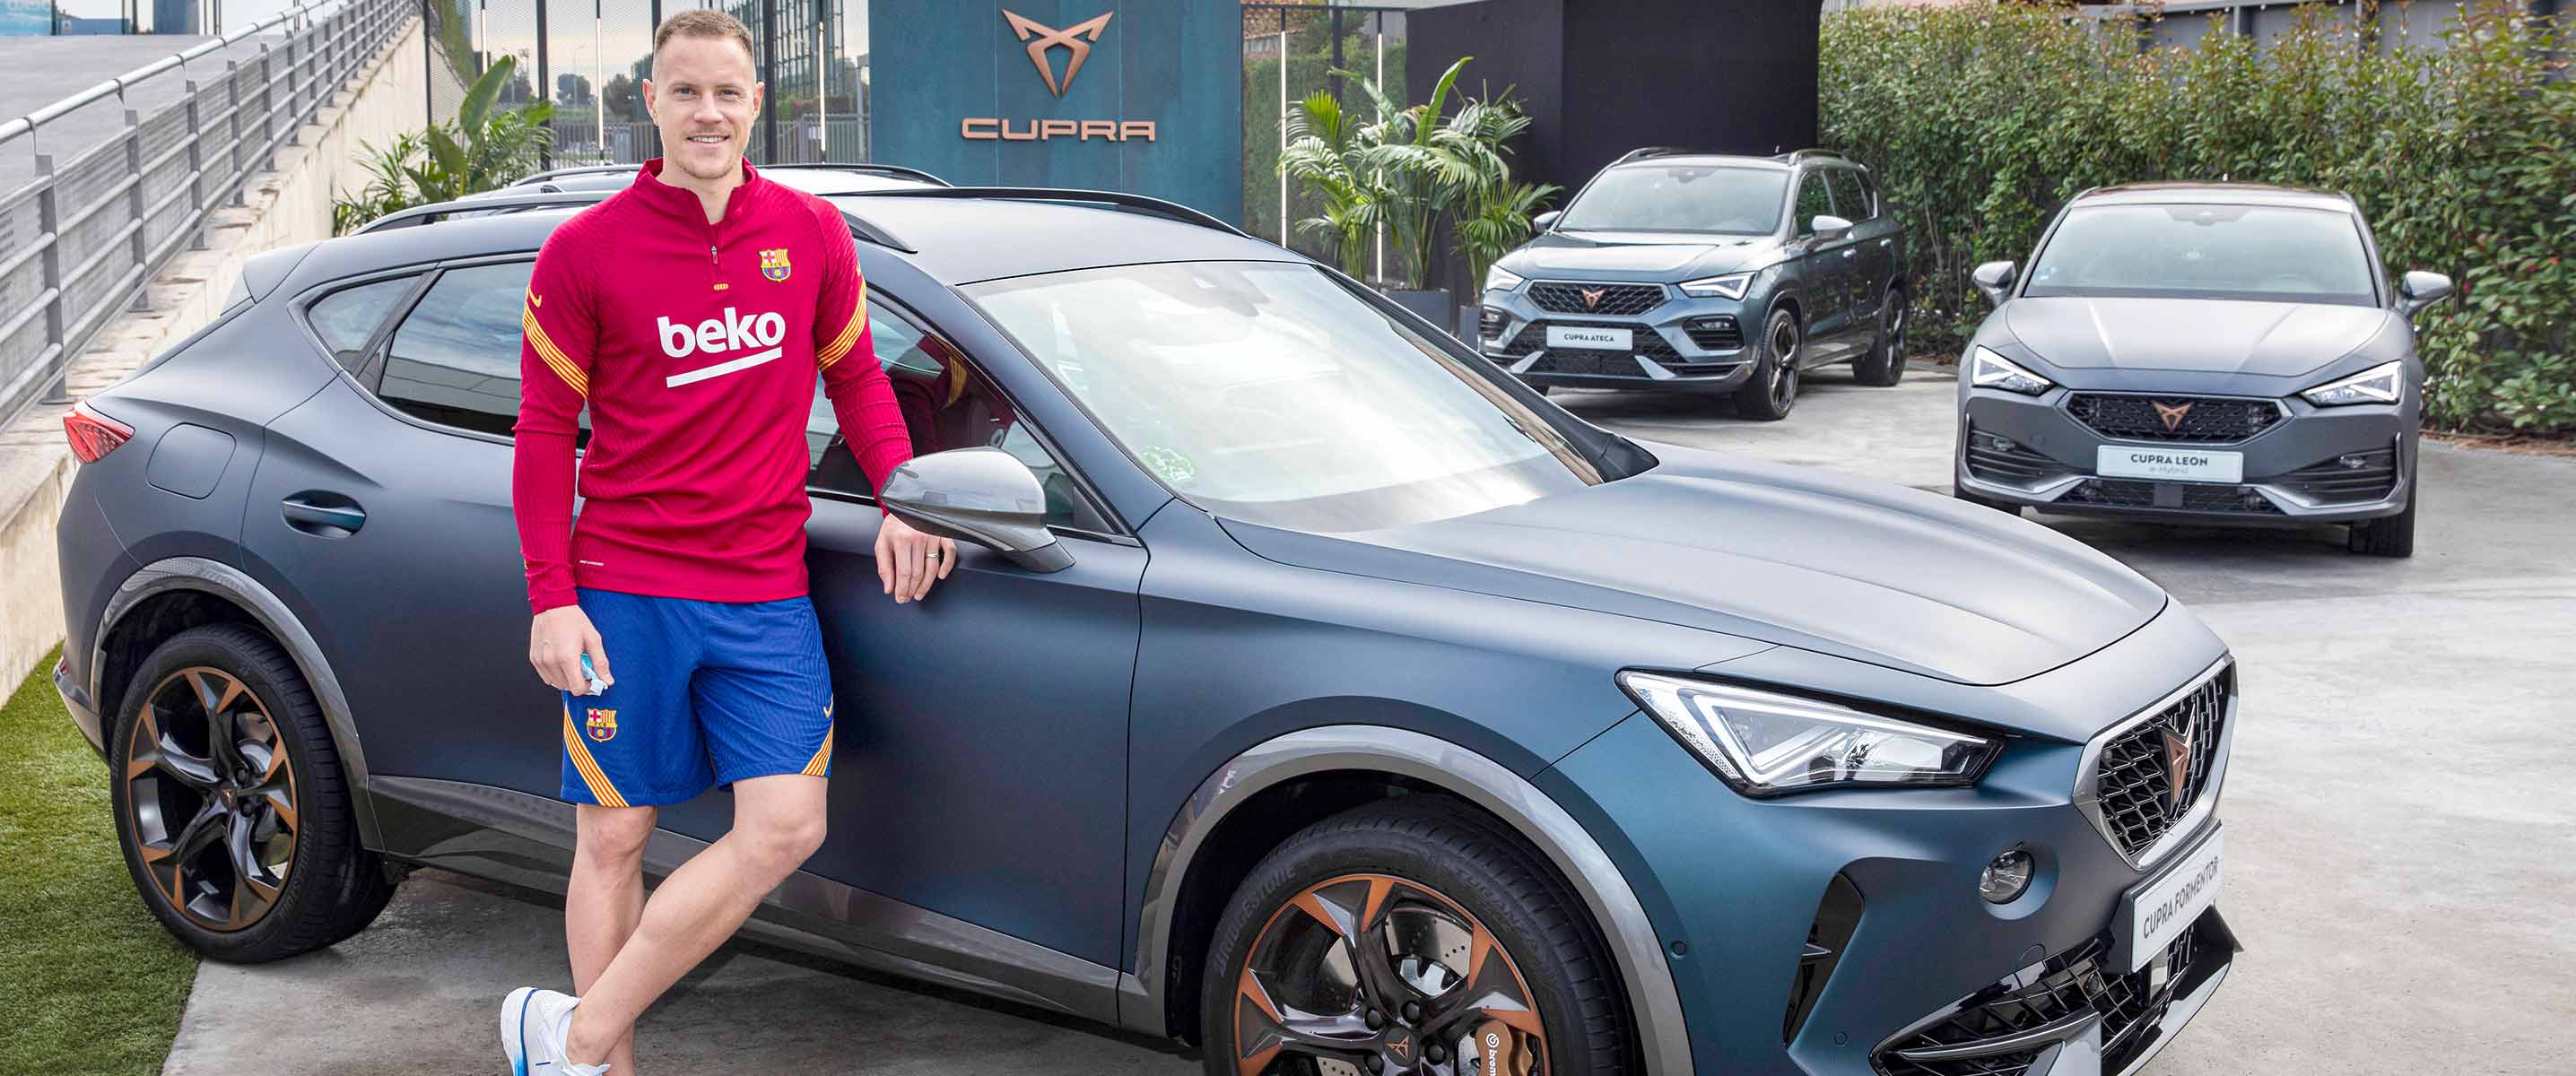  CUPRA cars customised by FCB players.